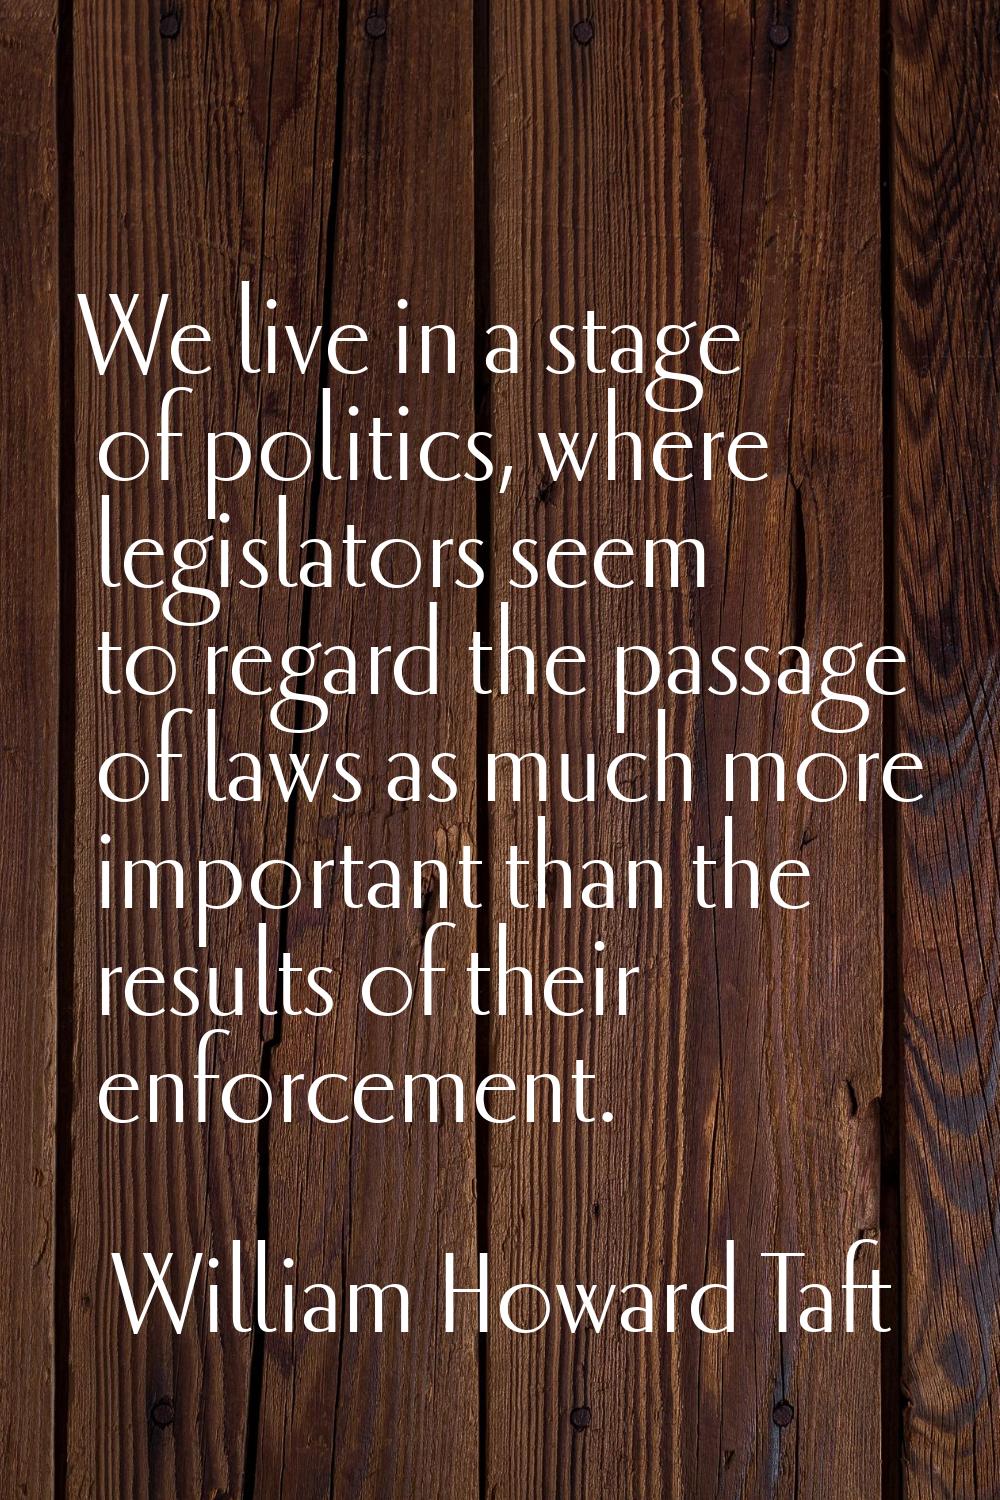 We live in a stage of politics, where legislators seem to regard the passage of laws as much more i